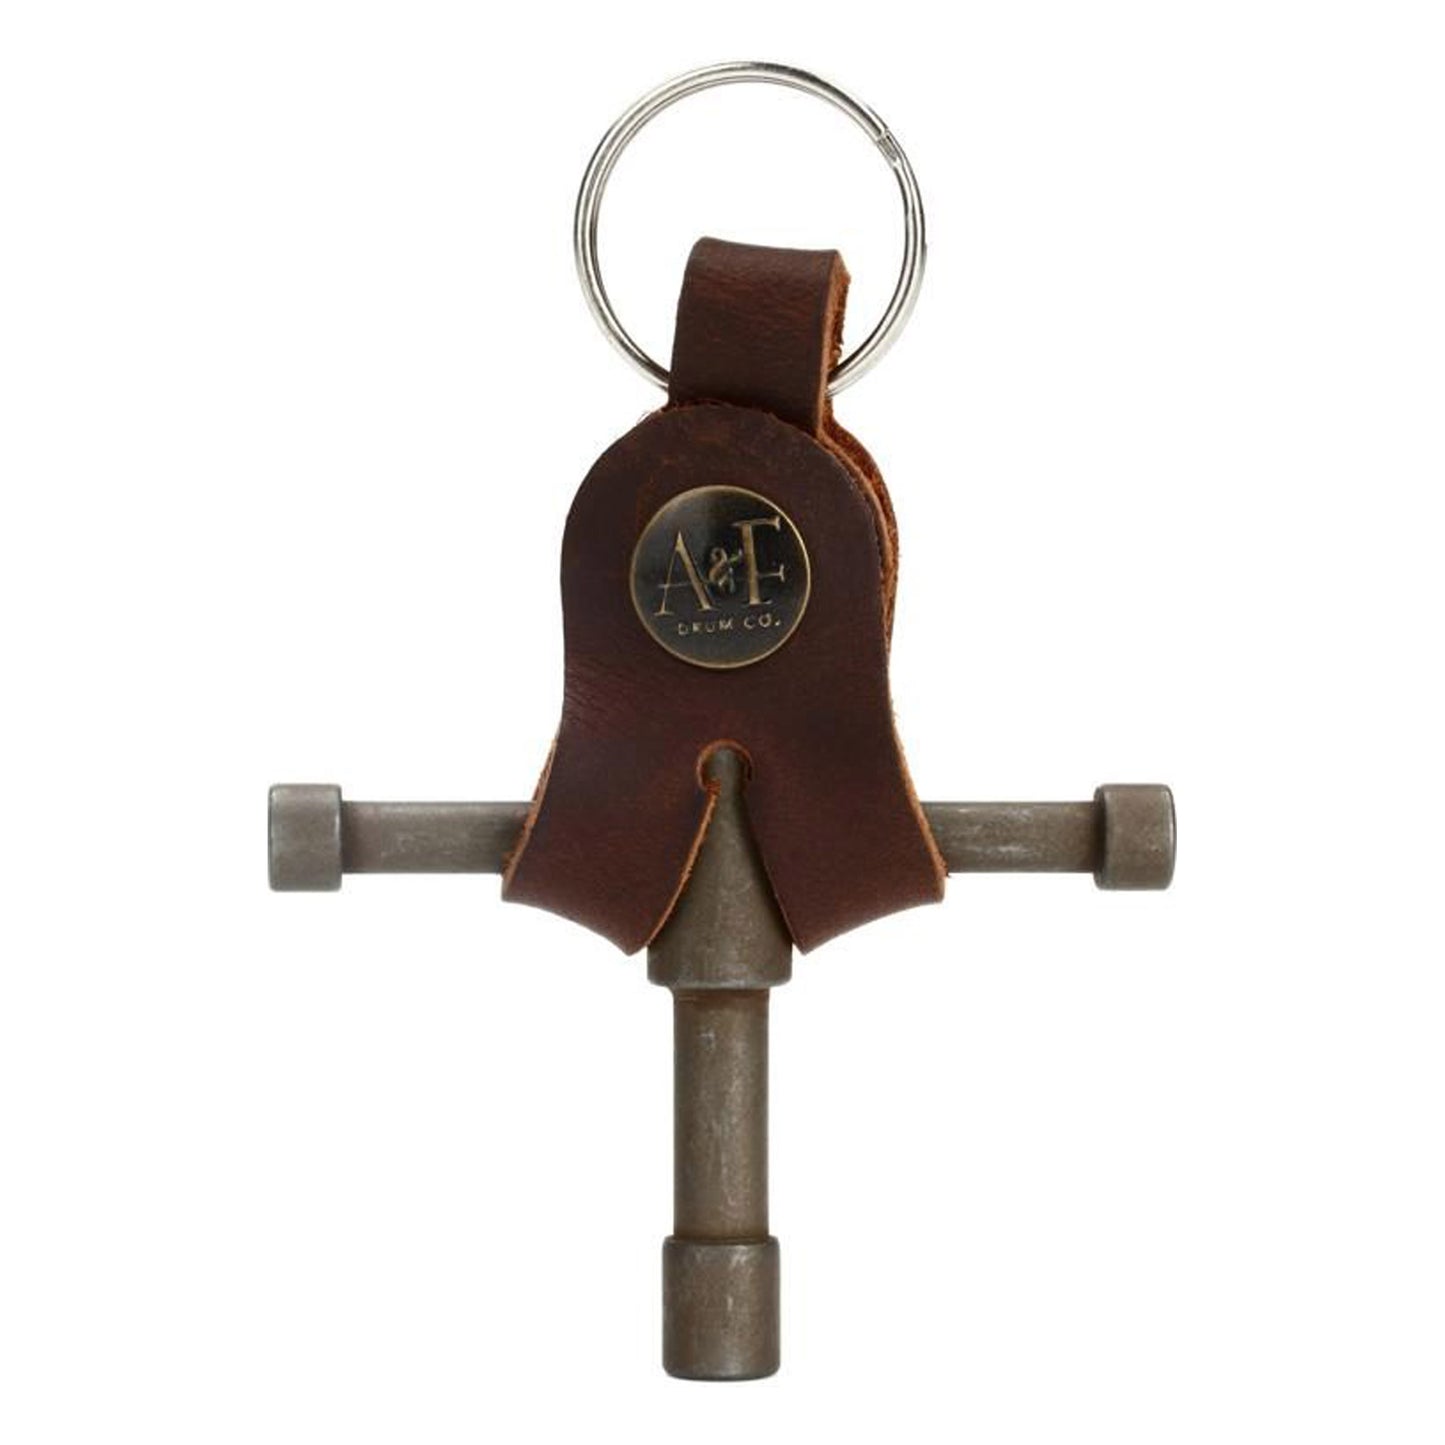 A&F Drum Key with Leather Holster